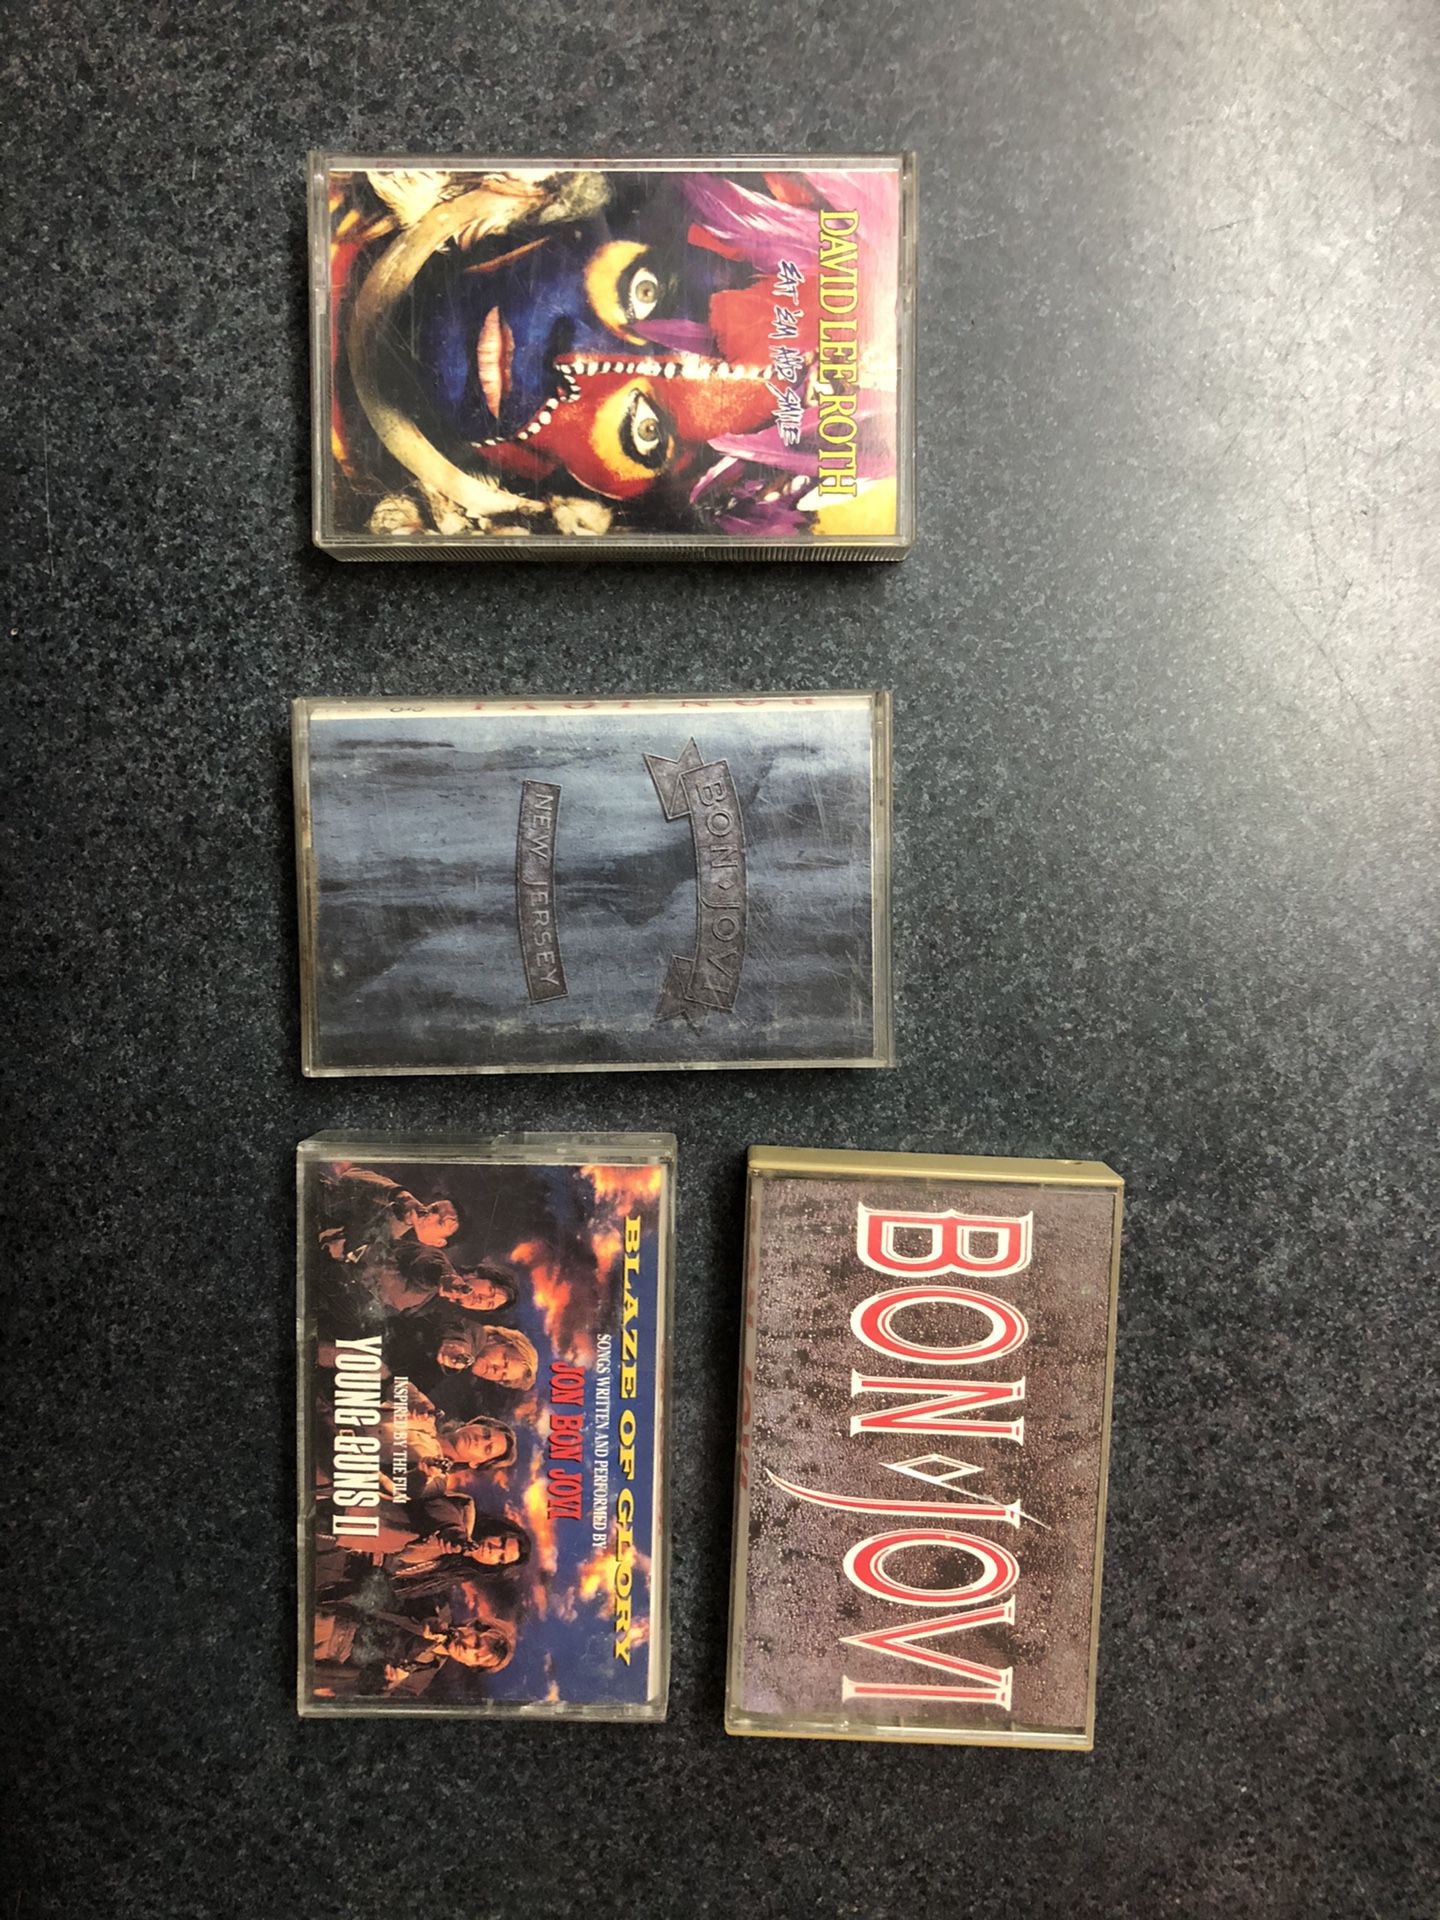 Bon Jovi and David Lee Roth Cassettes - titles are pictured